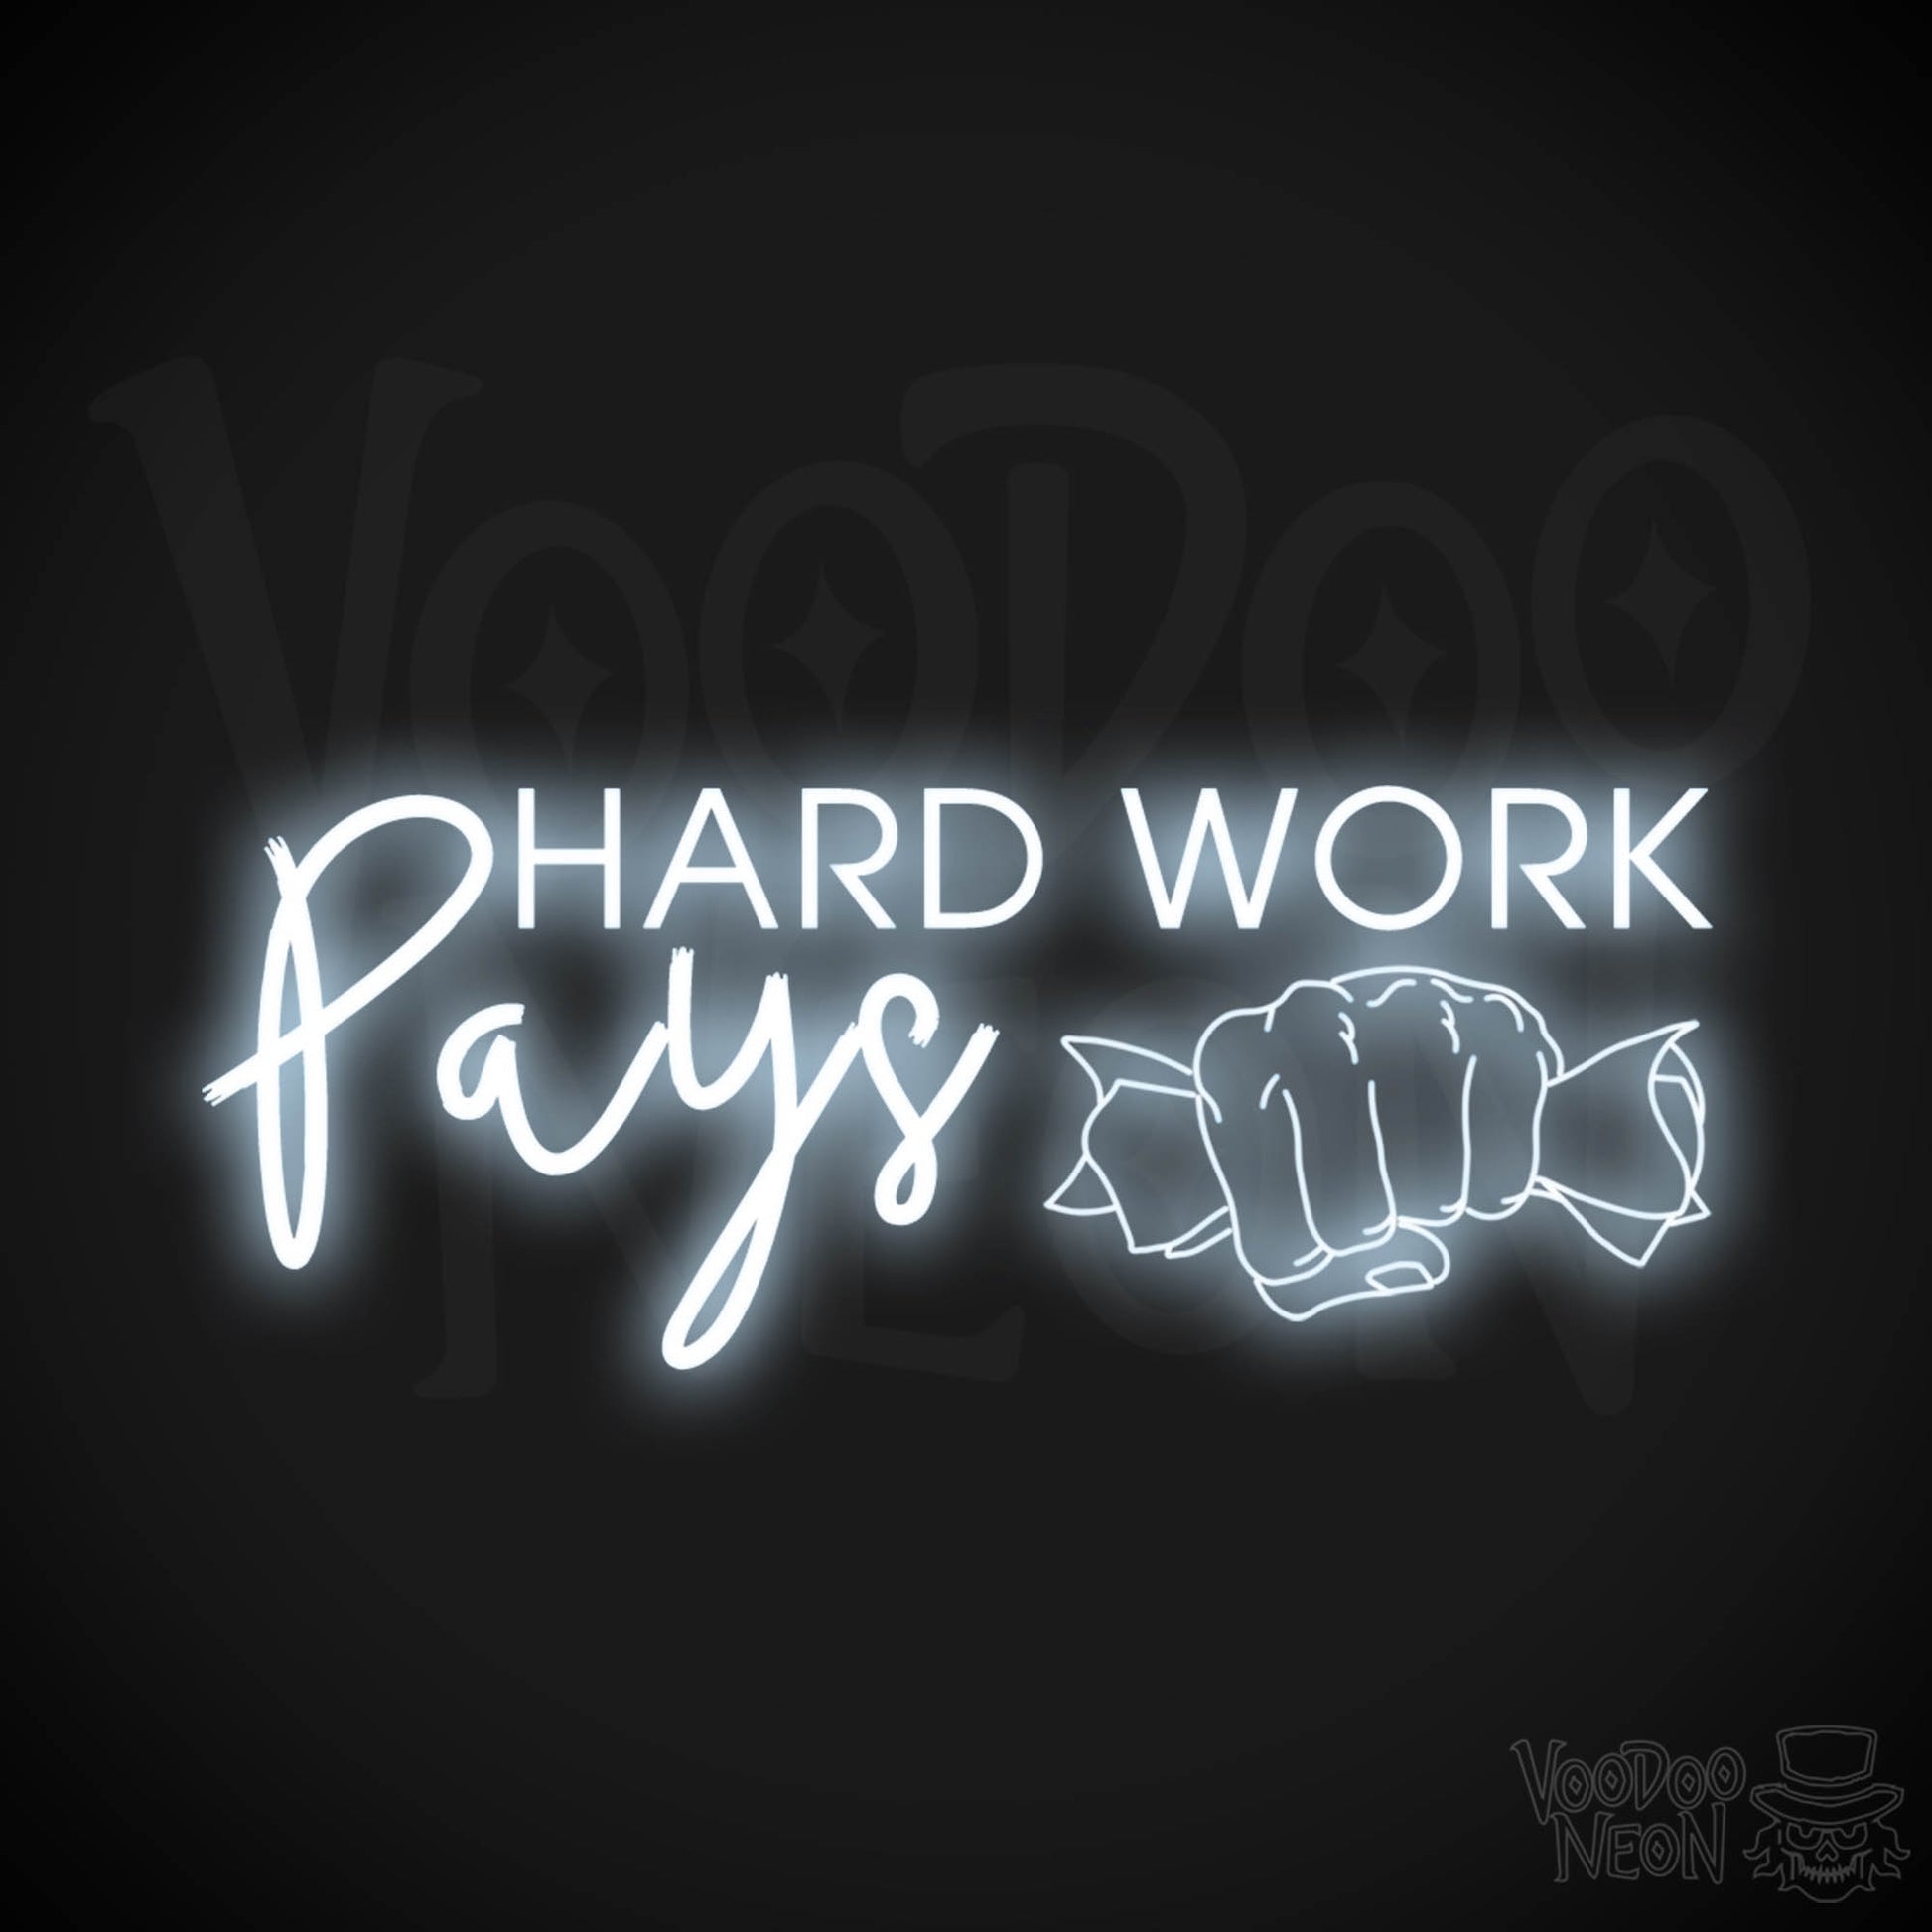 Hard Work Pays Neon Sign - LED Neon Wall Art - Color Cool White